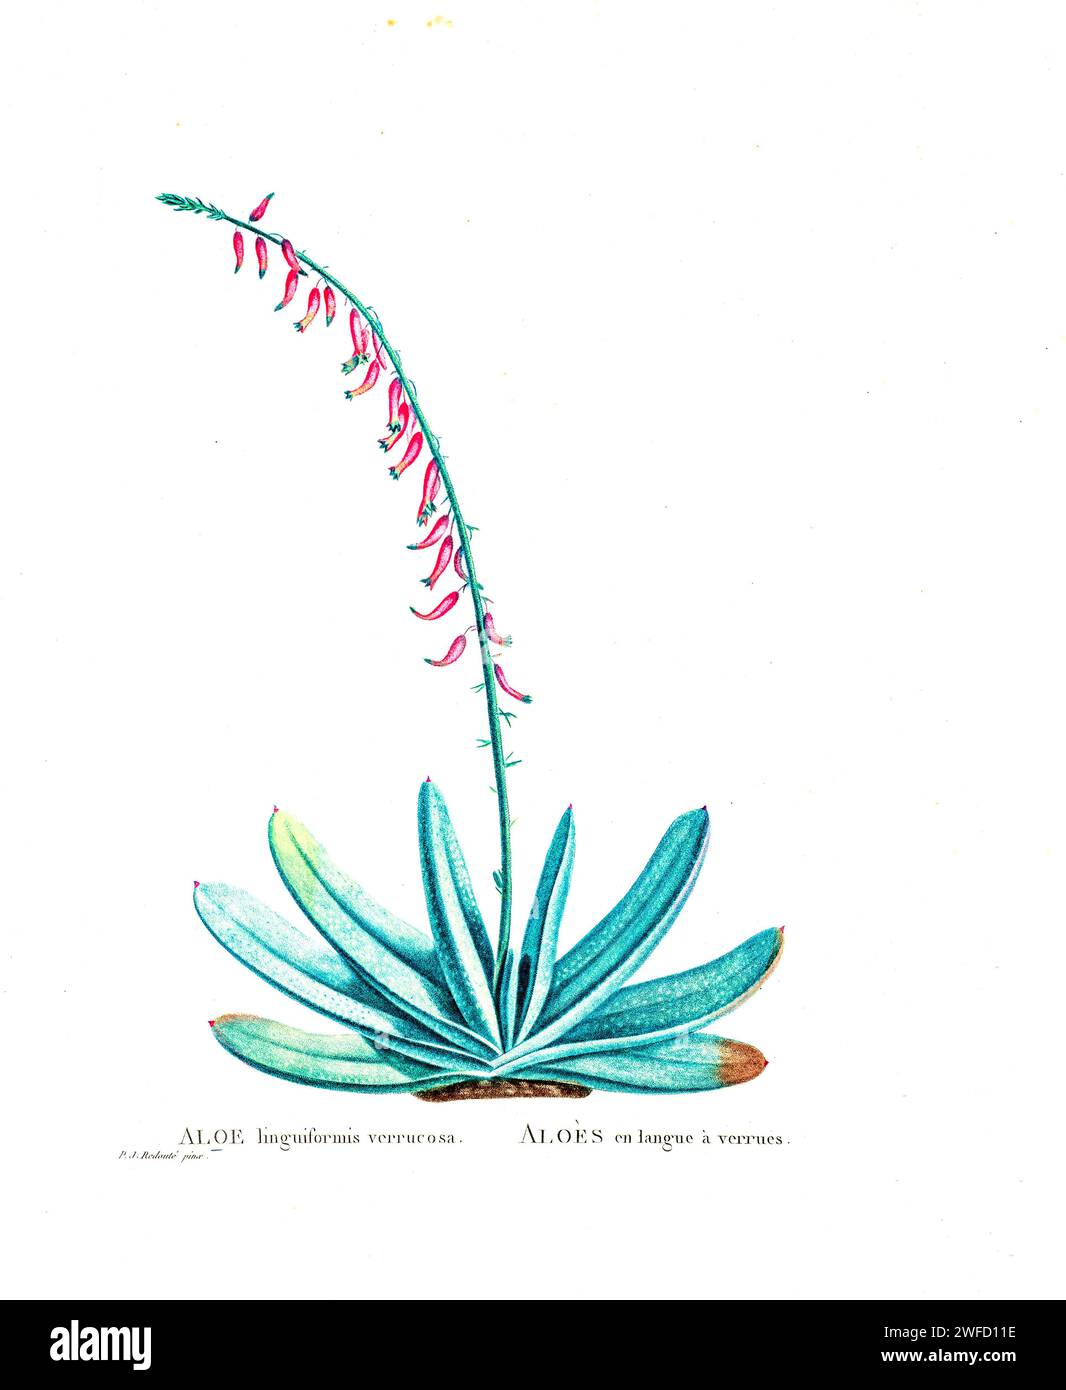 Gasteria angustifolia (Ait.) Haw. Here As Aloe linguiformis verrucosa from History of Succulent Plants [Plantarum historia succulentarum / Histoire des plantes grasses] painted by Pierre-Joseph Redouté and described by Augustin Pyramus de Candolle 1799 Stock Photo